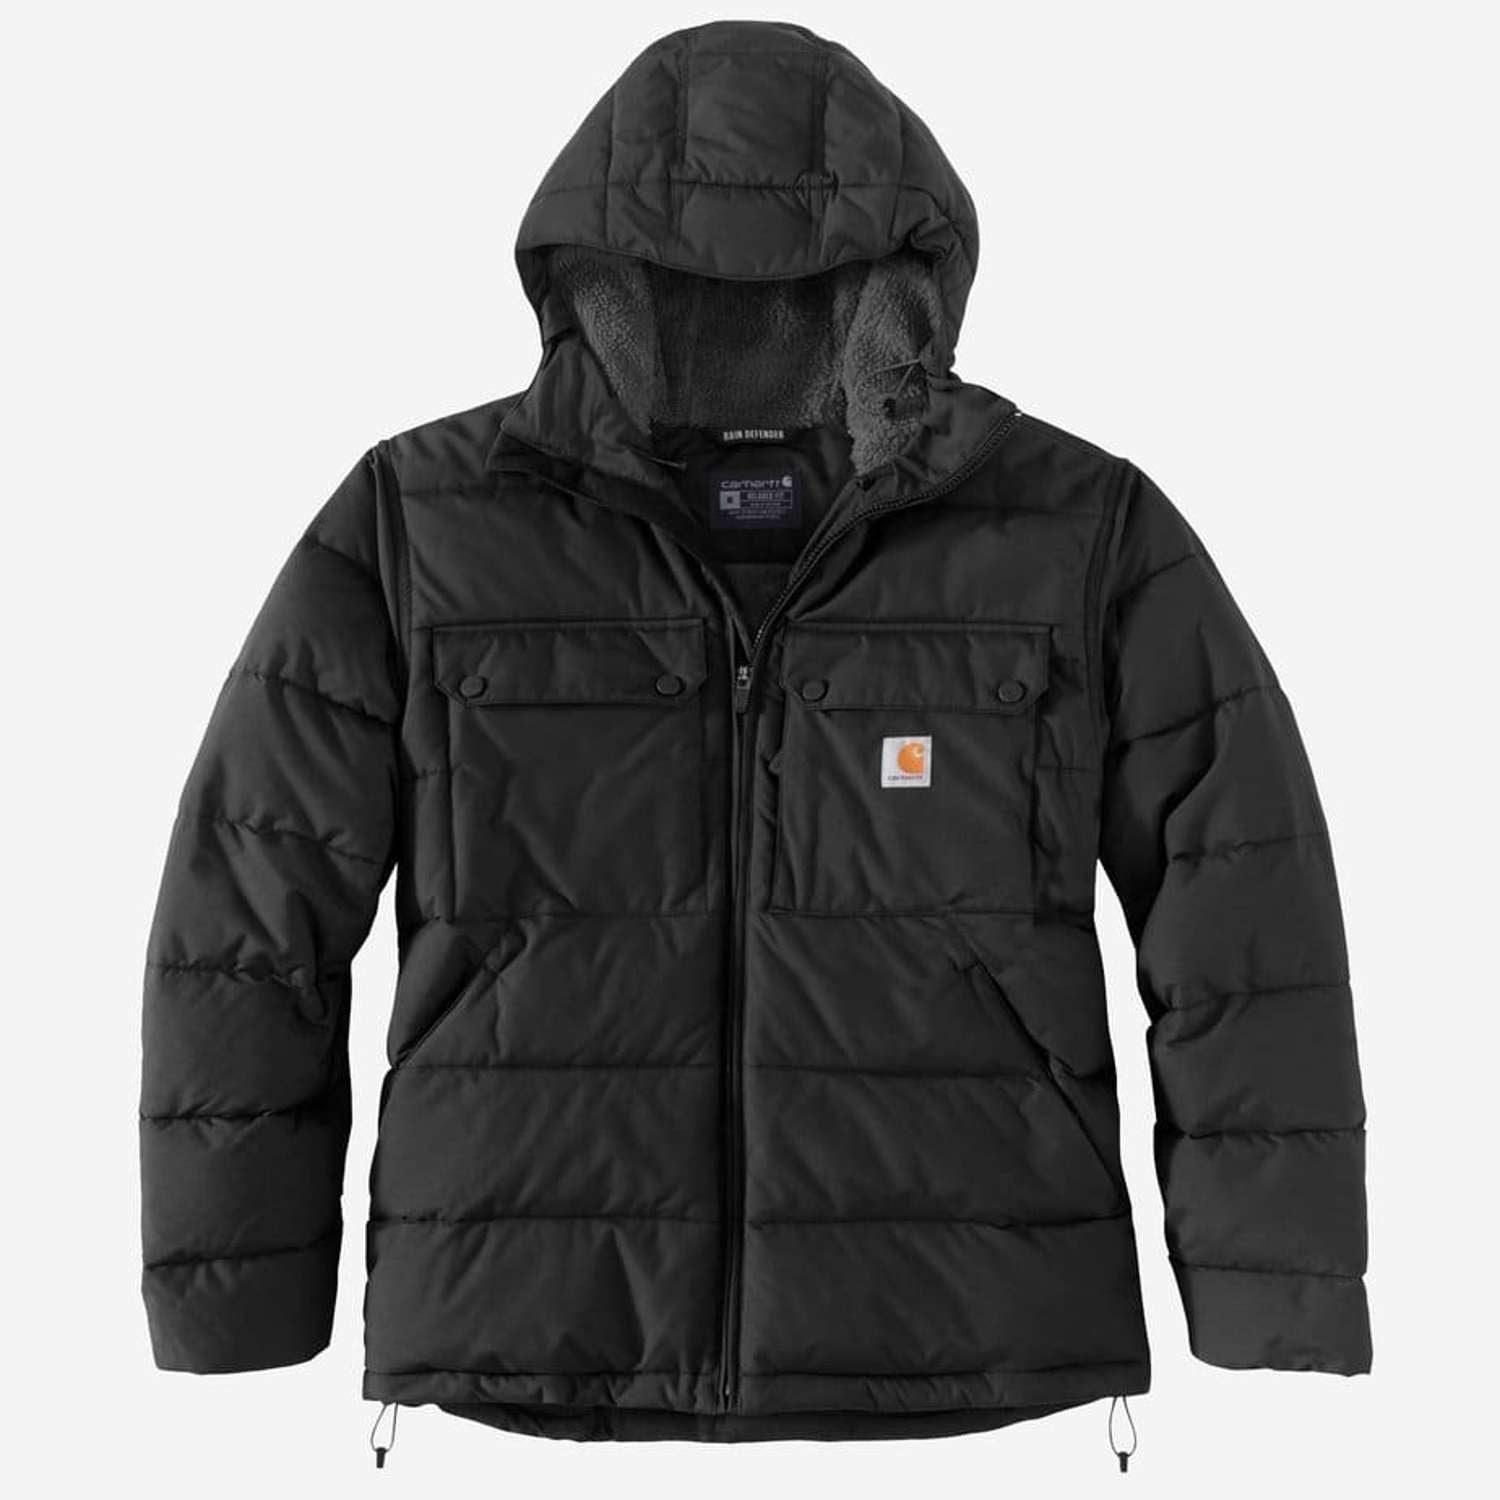 Se CARHARTT Loose Fit Midweight Insulated Jacket BLACK - XL hos Toolster.dk